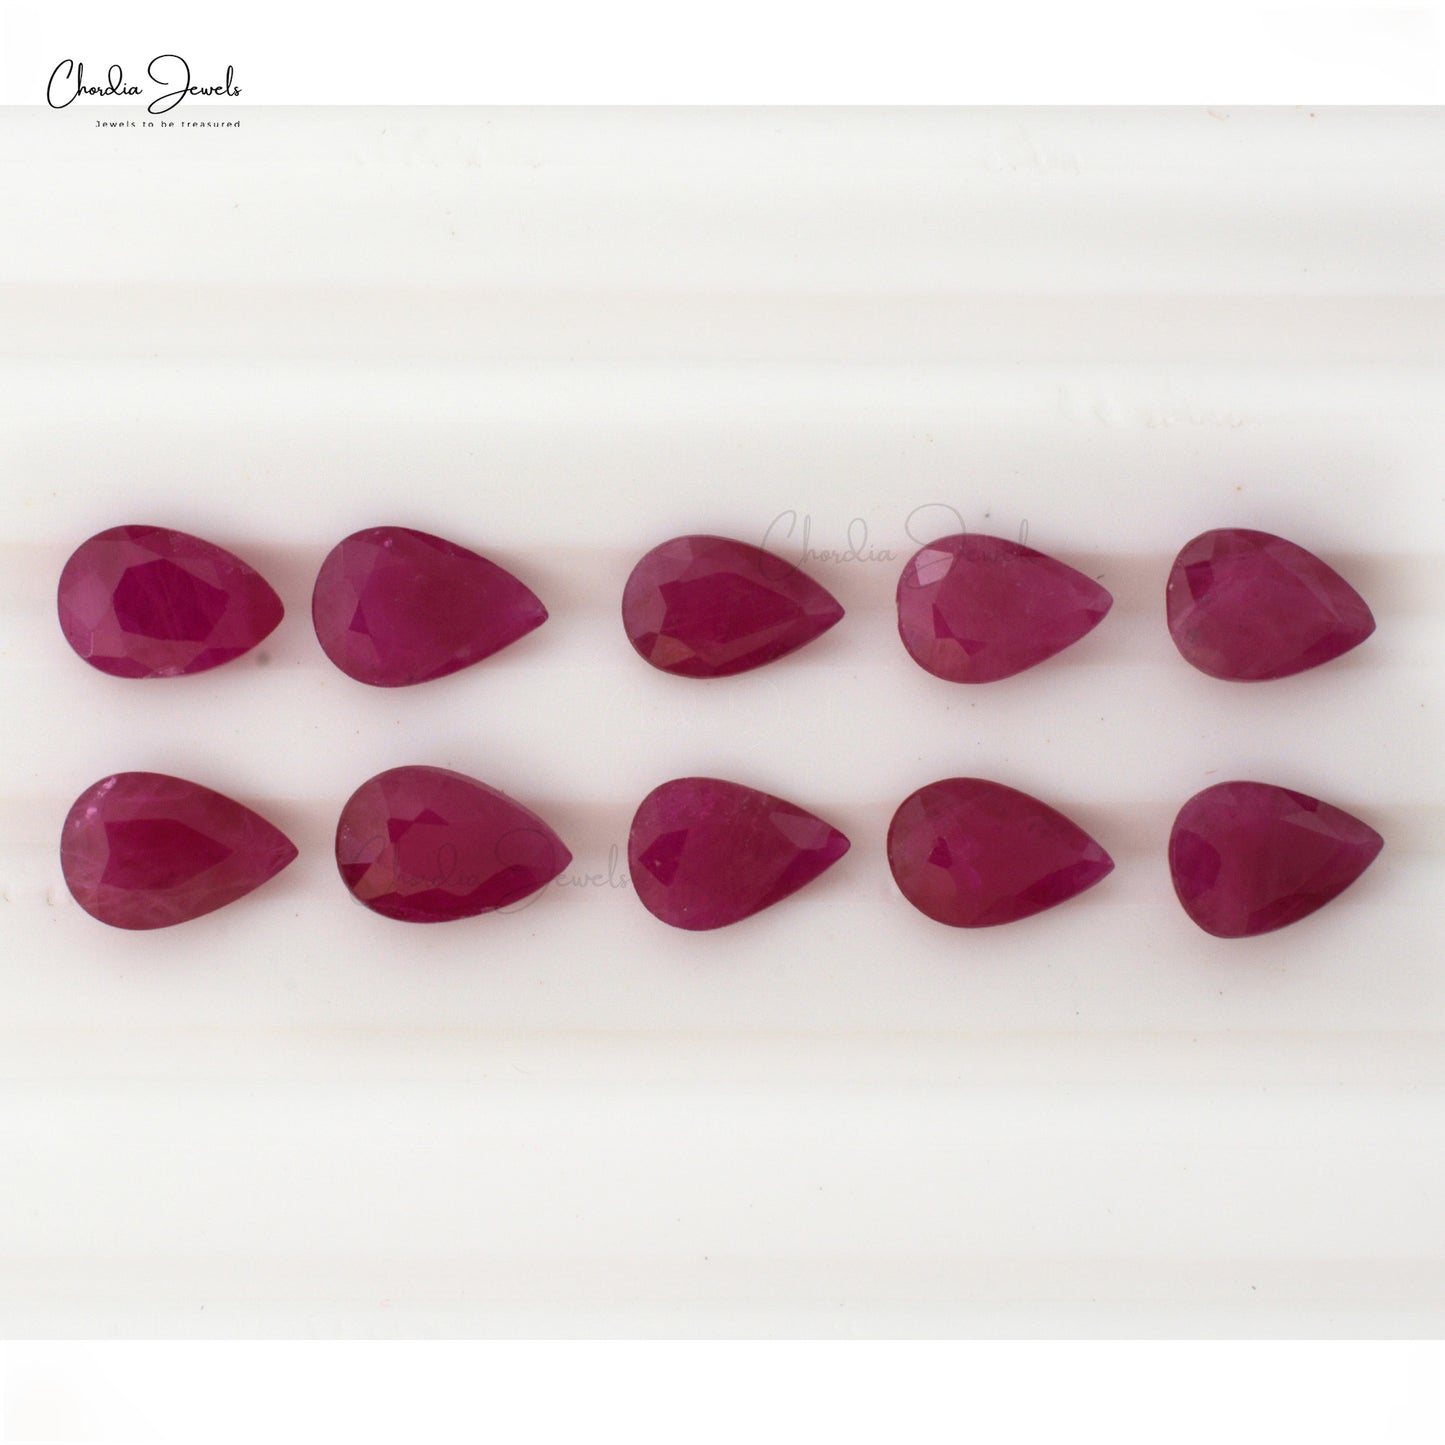 7x5mm Top Quality Ruby Pear Cut Faceted Gemstone Wholesale Price, 1 Piece